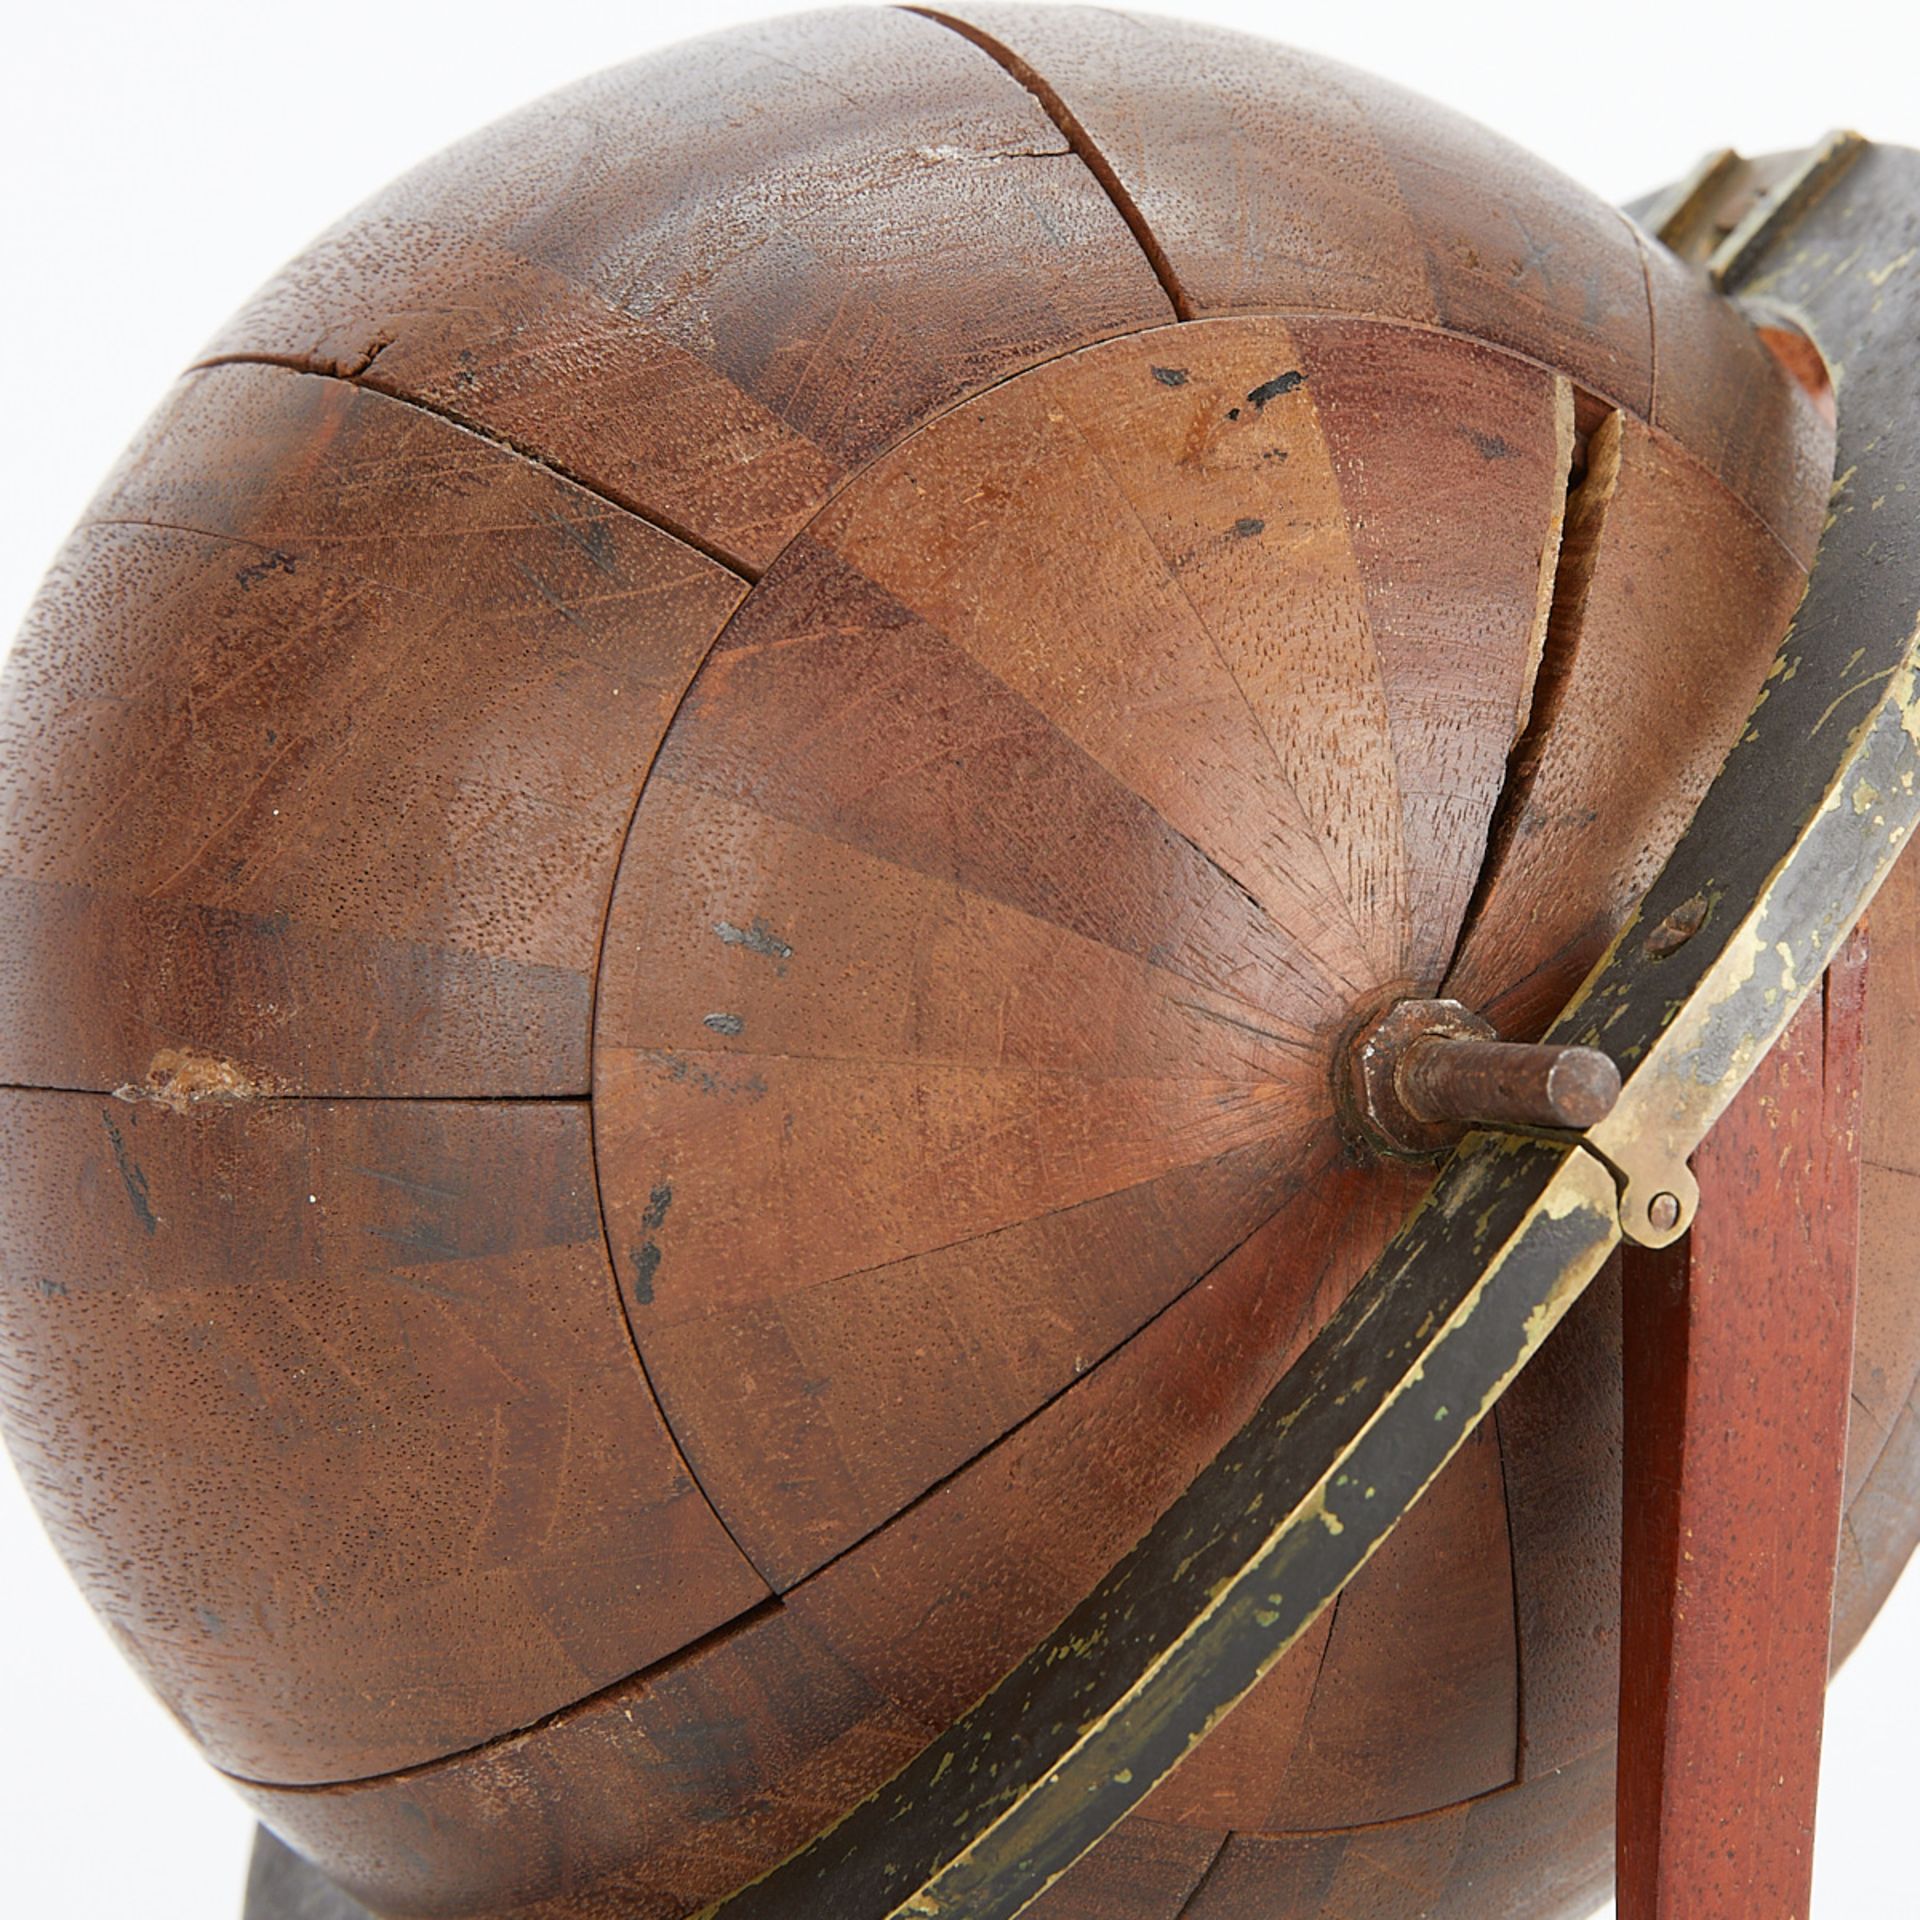 Vintage Wooden Sphere or Globe with Case - Image 2 of 15